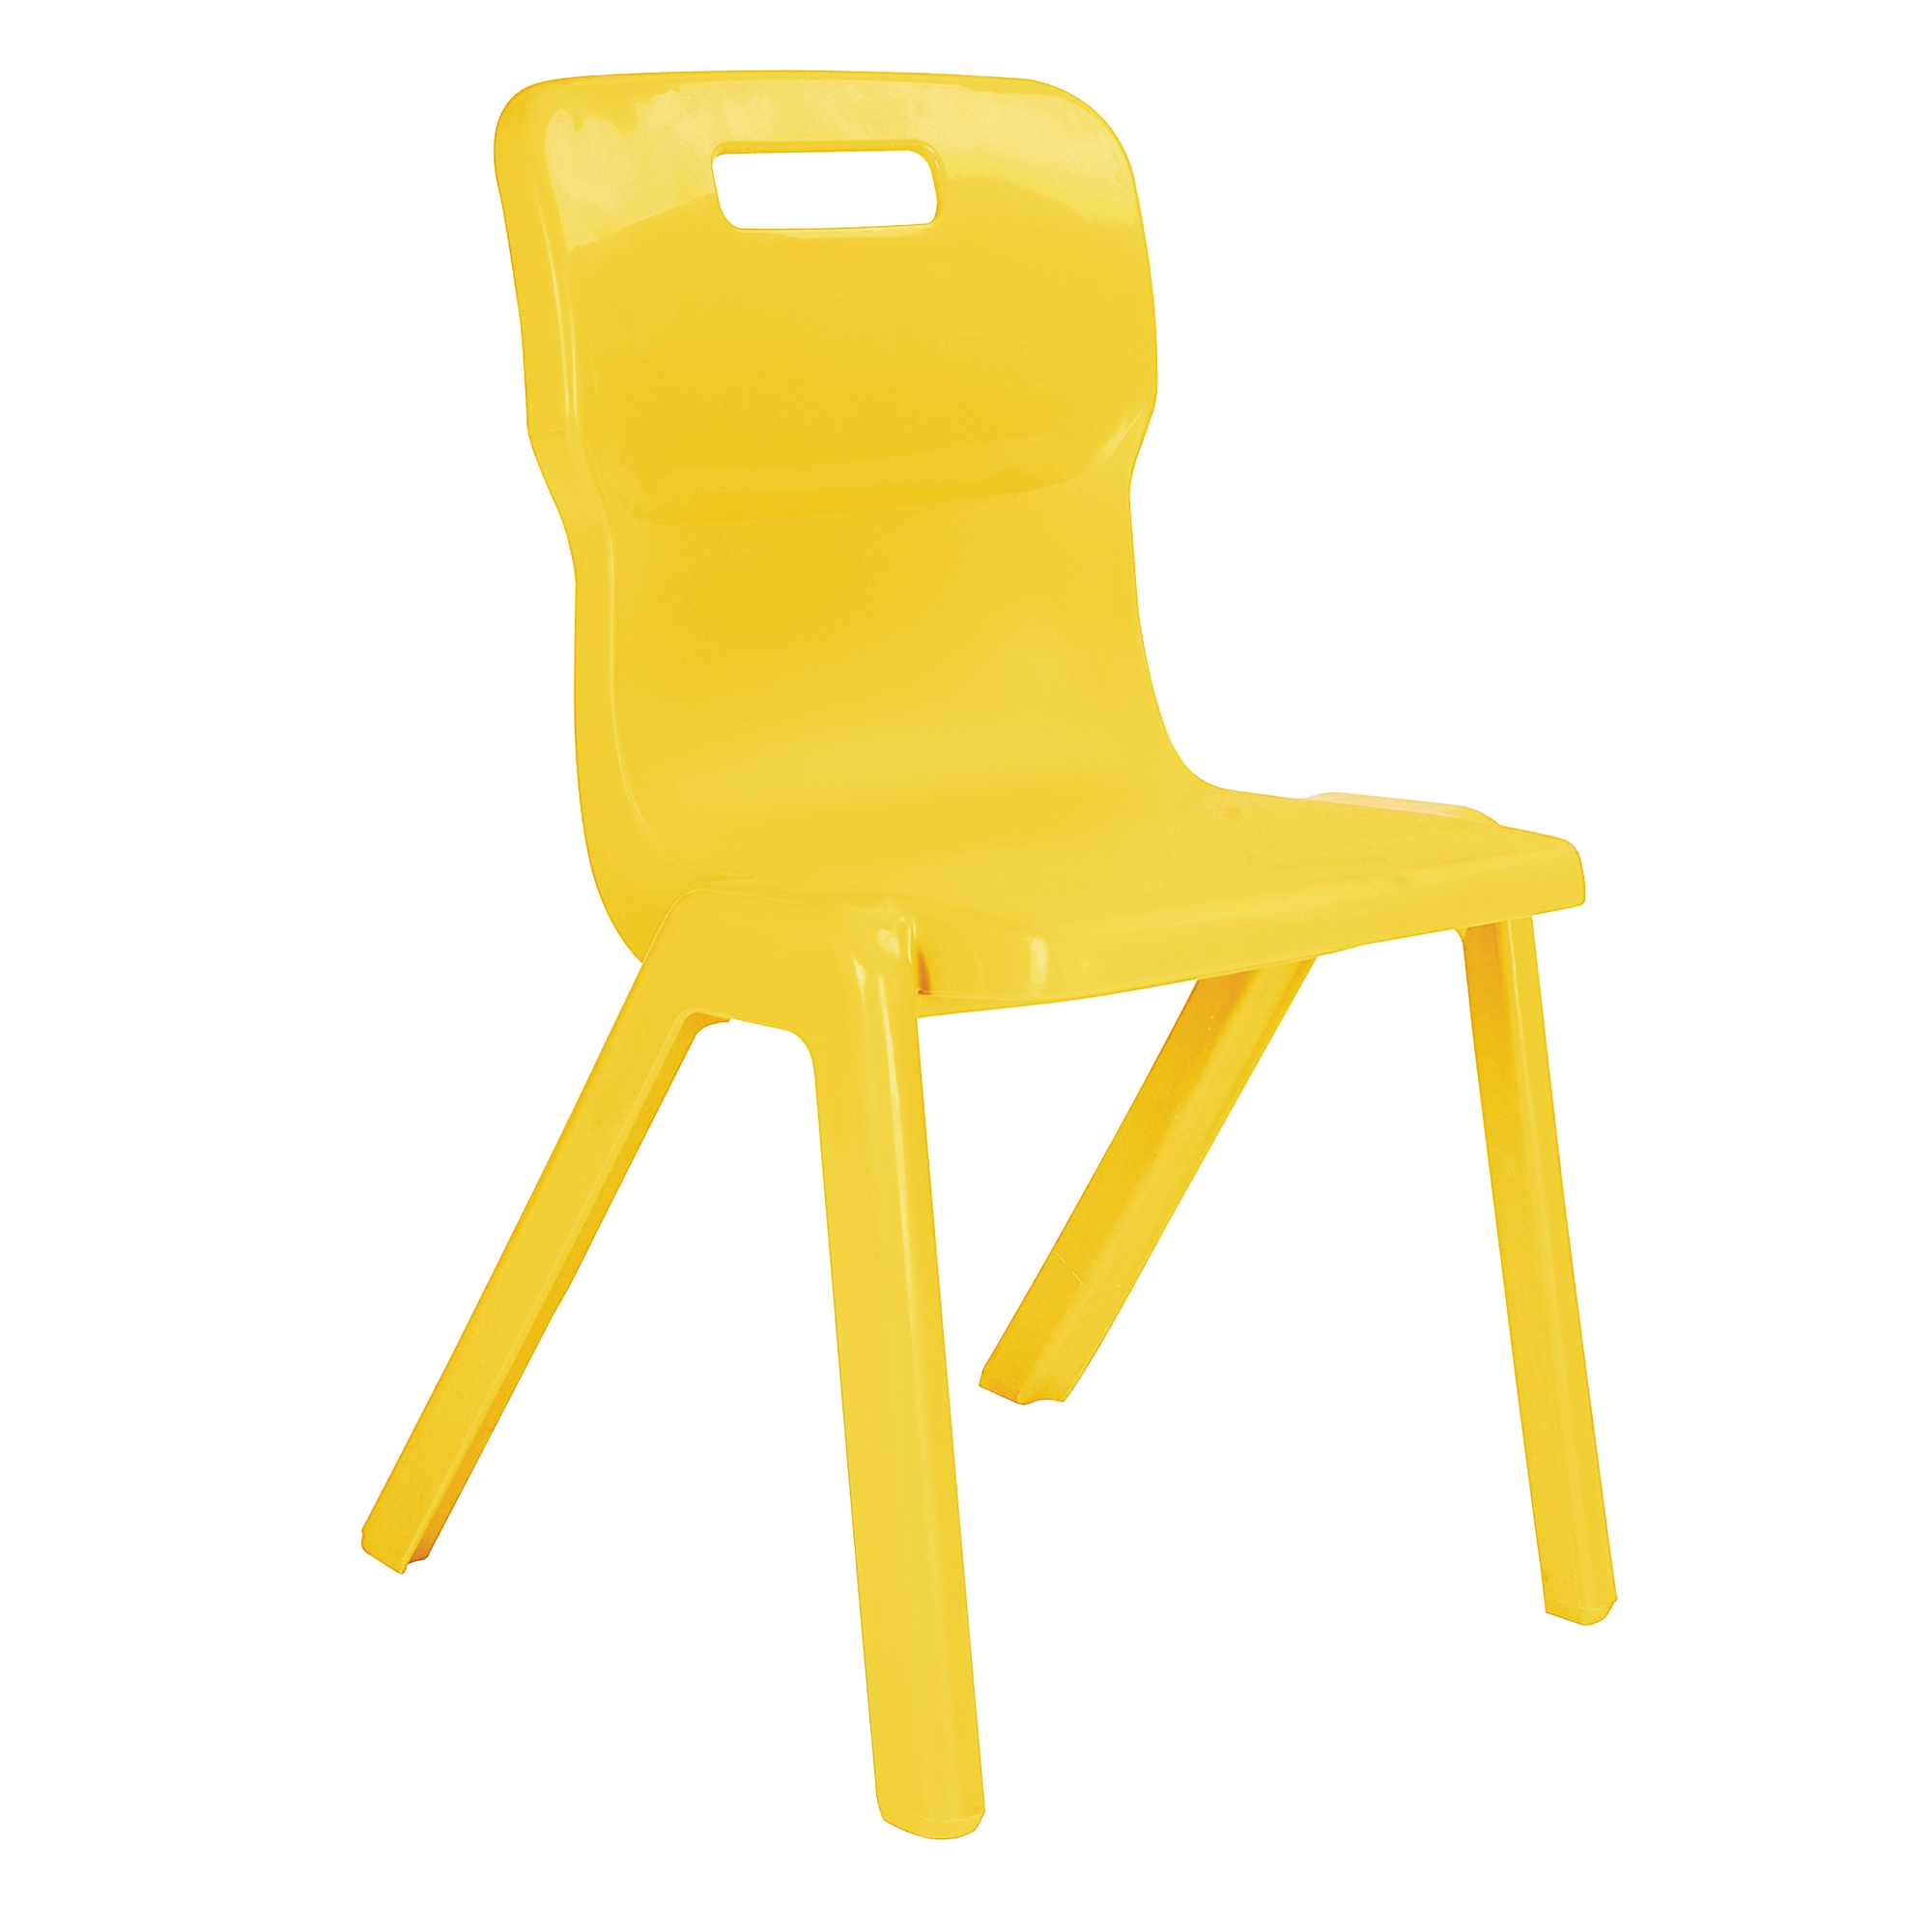 One Piece Titan Chair - Size 4 Ages 8-11 Yellow